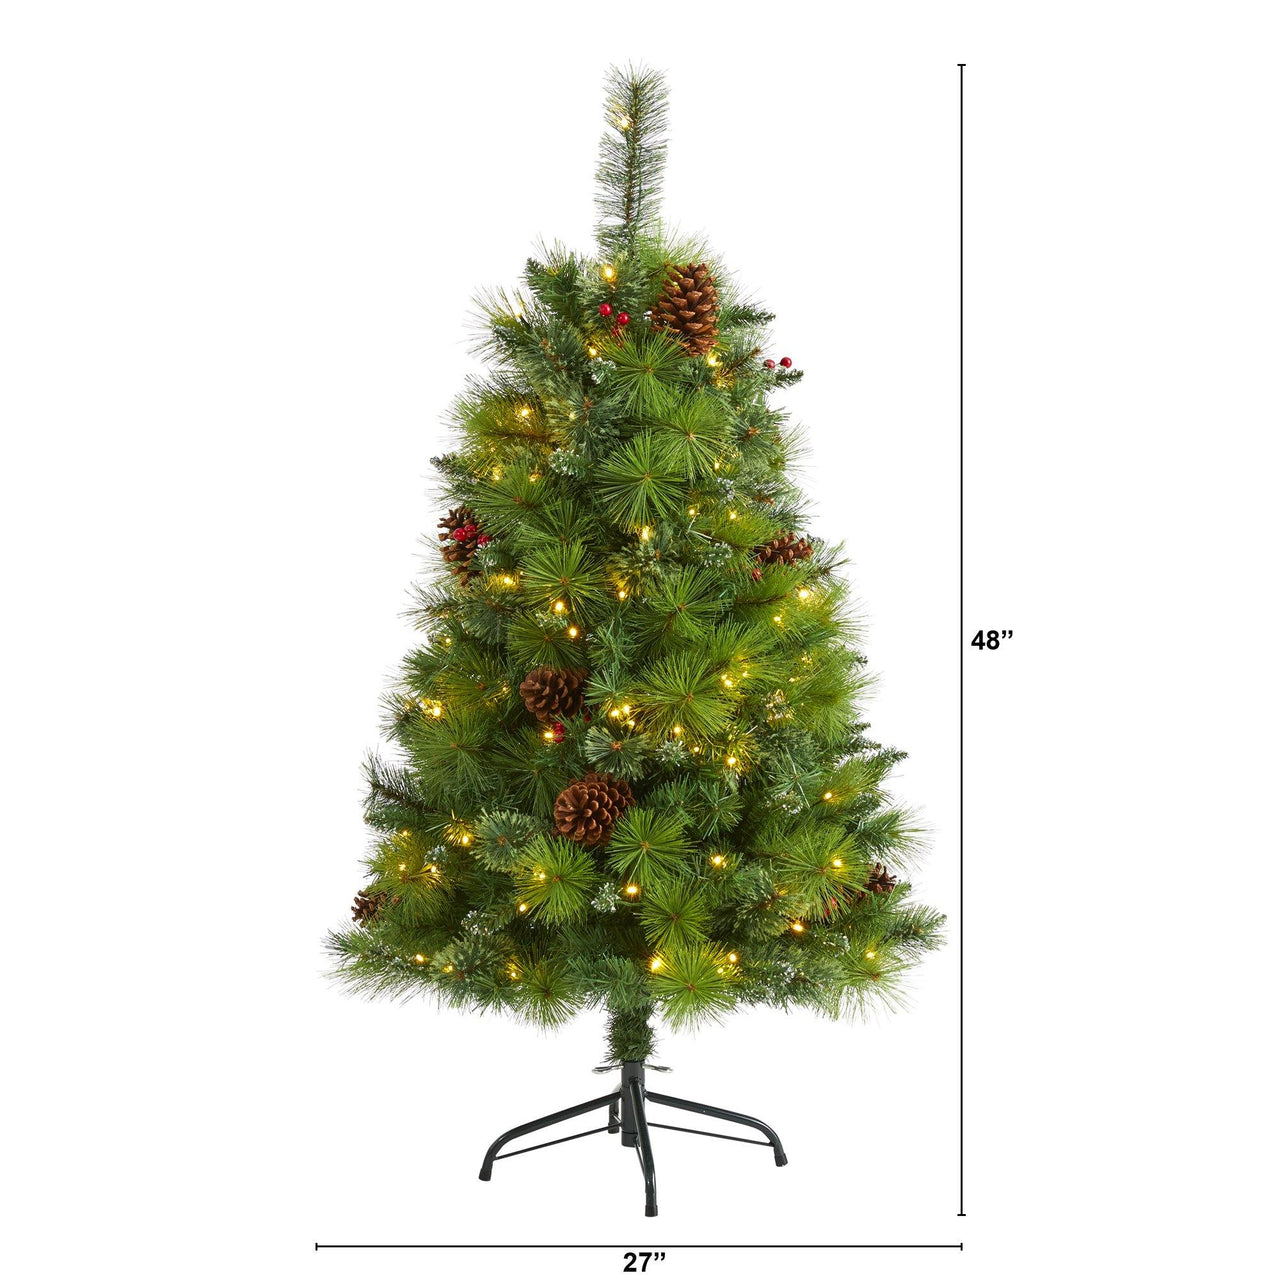 4’ Montana Mixed Pine Artificial Christmas Tree with Pine Cones, Berries and 150 Clear LED Lights - The Fox Decor